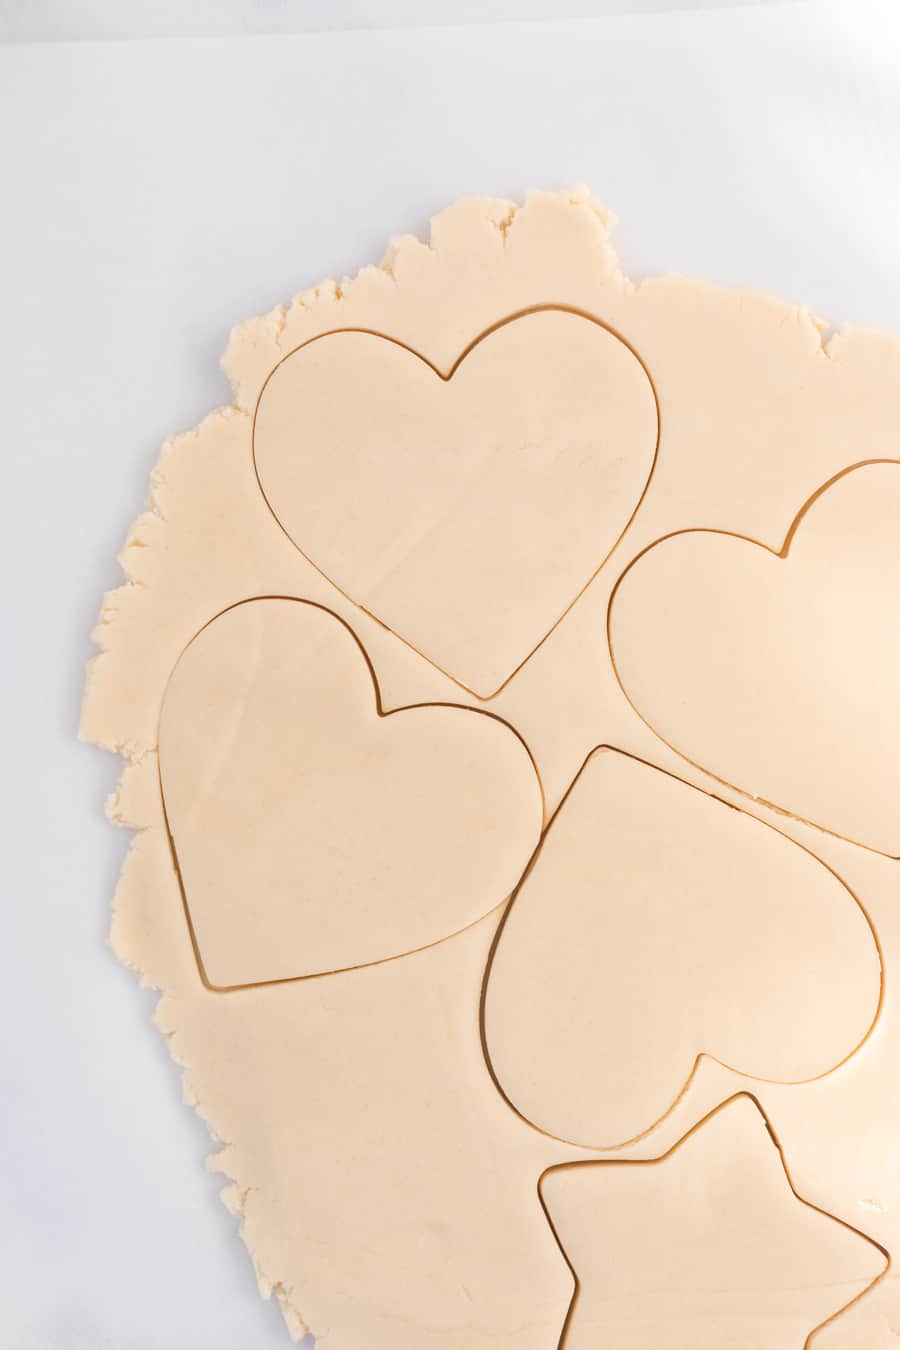 hearts cut out of shortbread cookie dough.